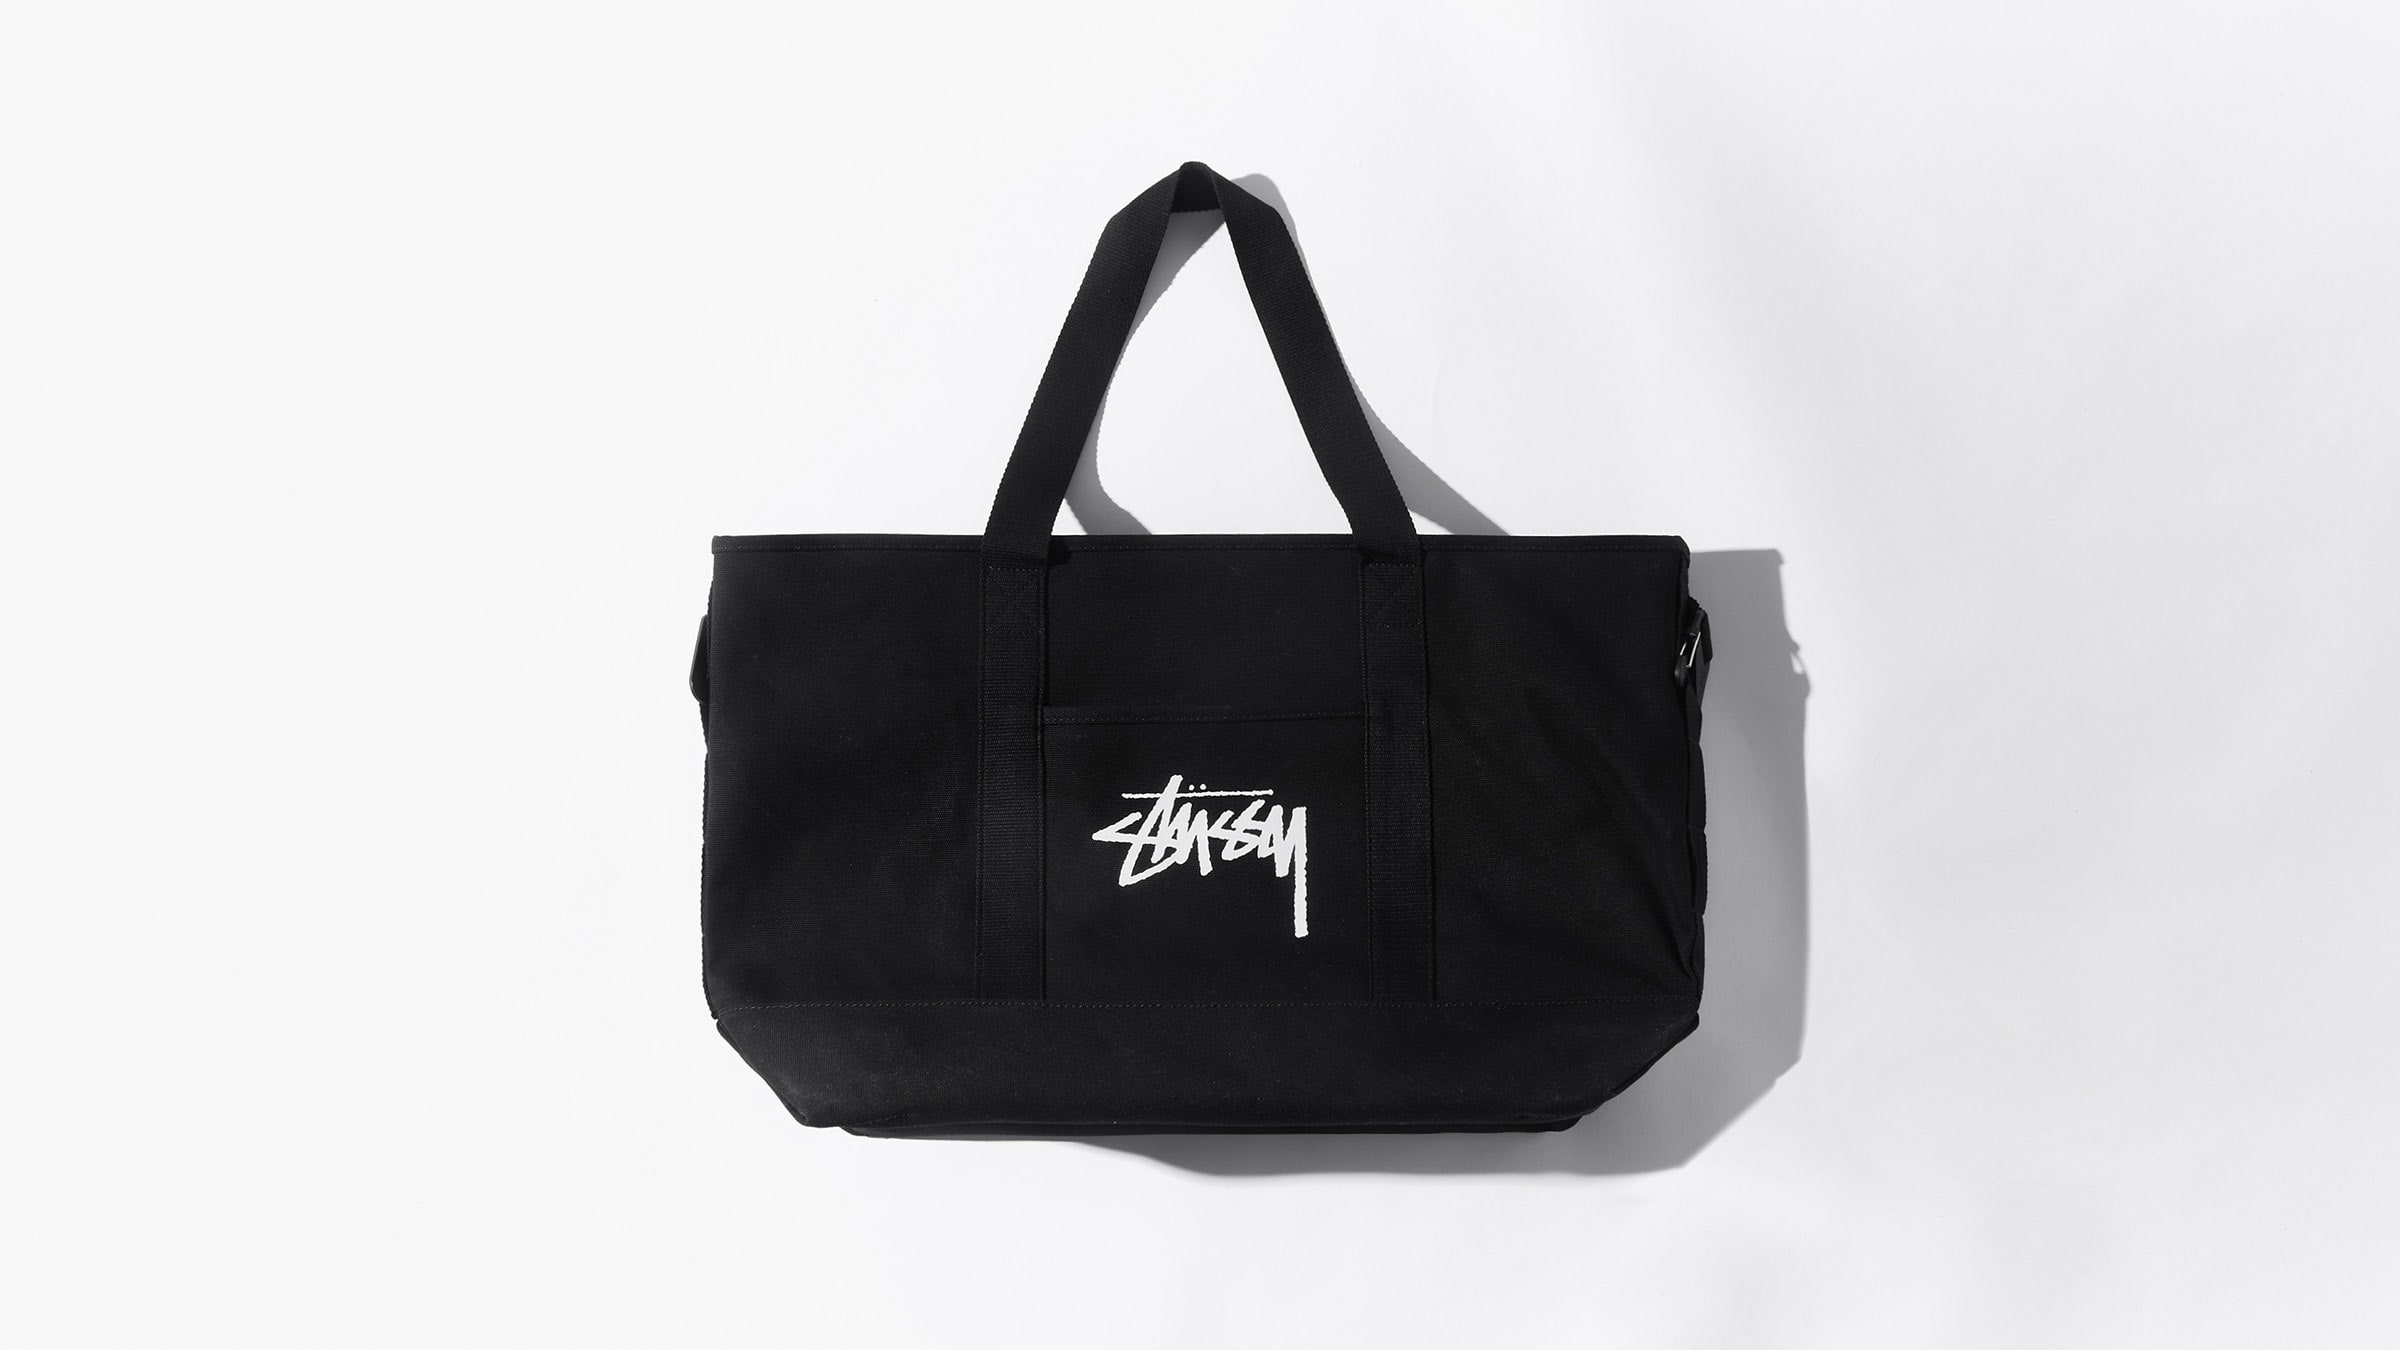 Nike x Stussy Tote Bag (Black) | END. Launches